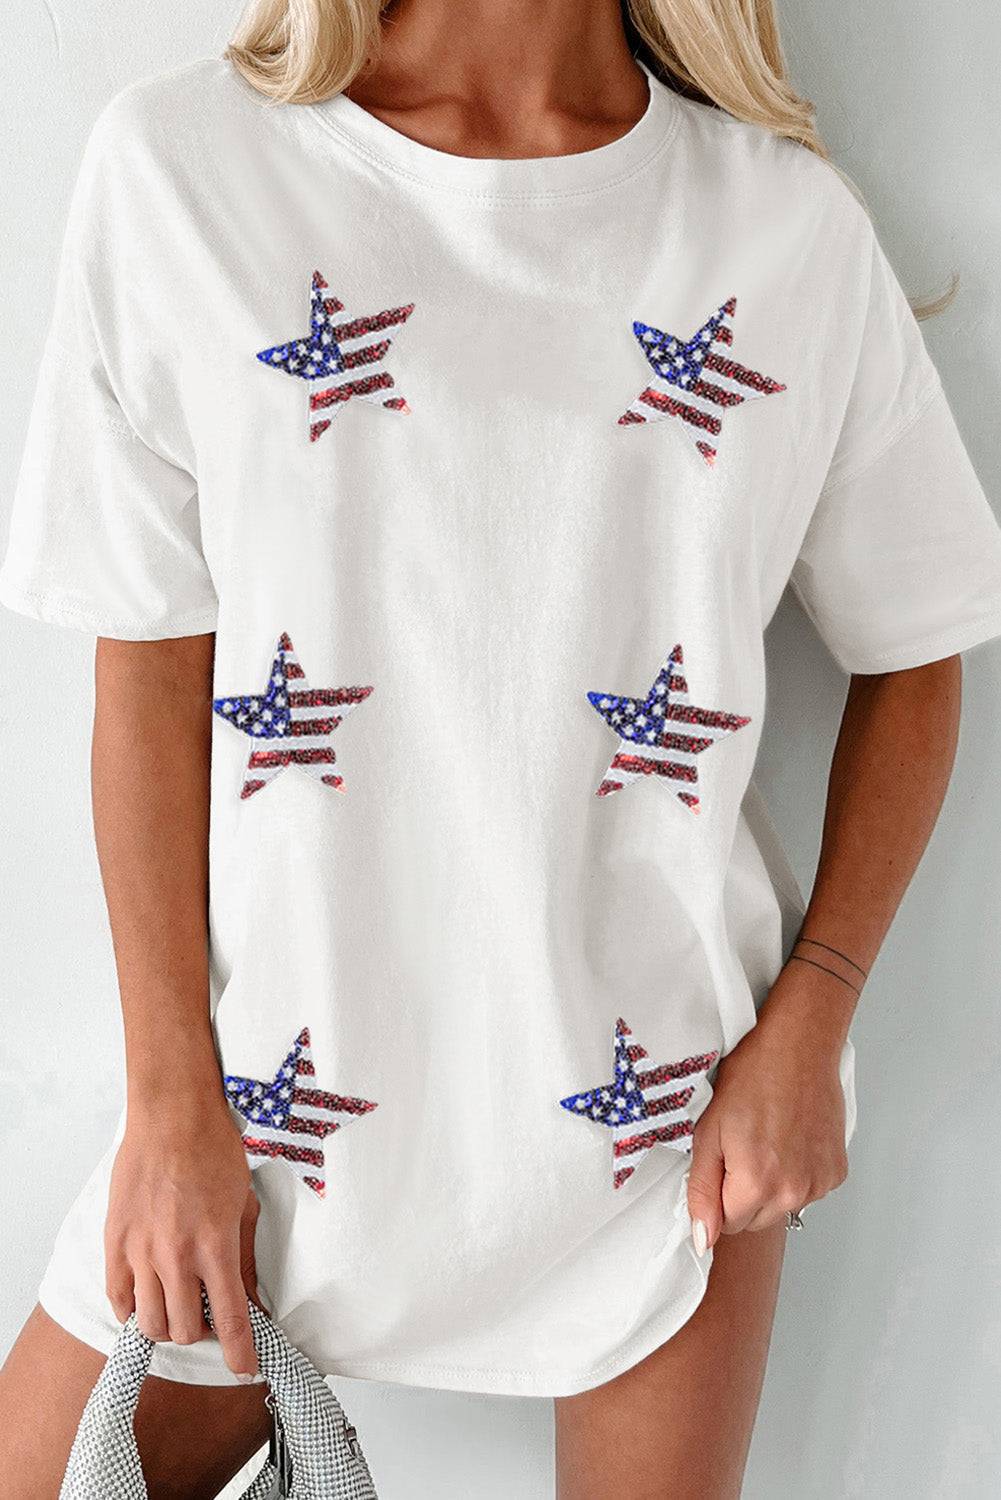 a woman wearing a white t - shirt with american flags on it